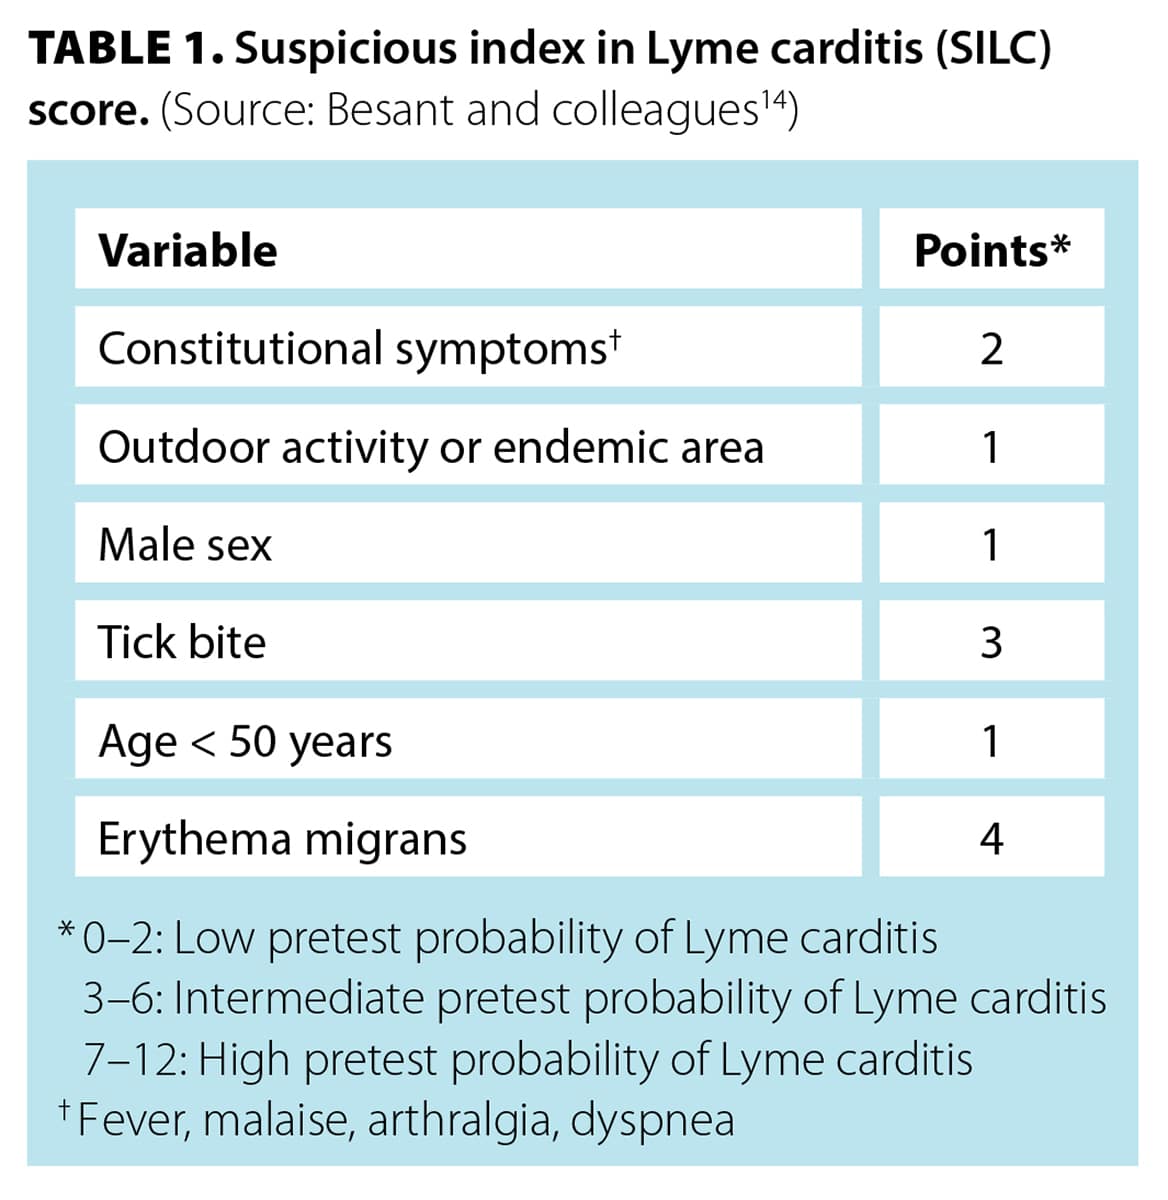 Lyme carditis: A cant miss diagnosis